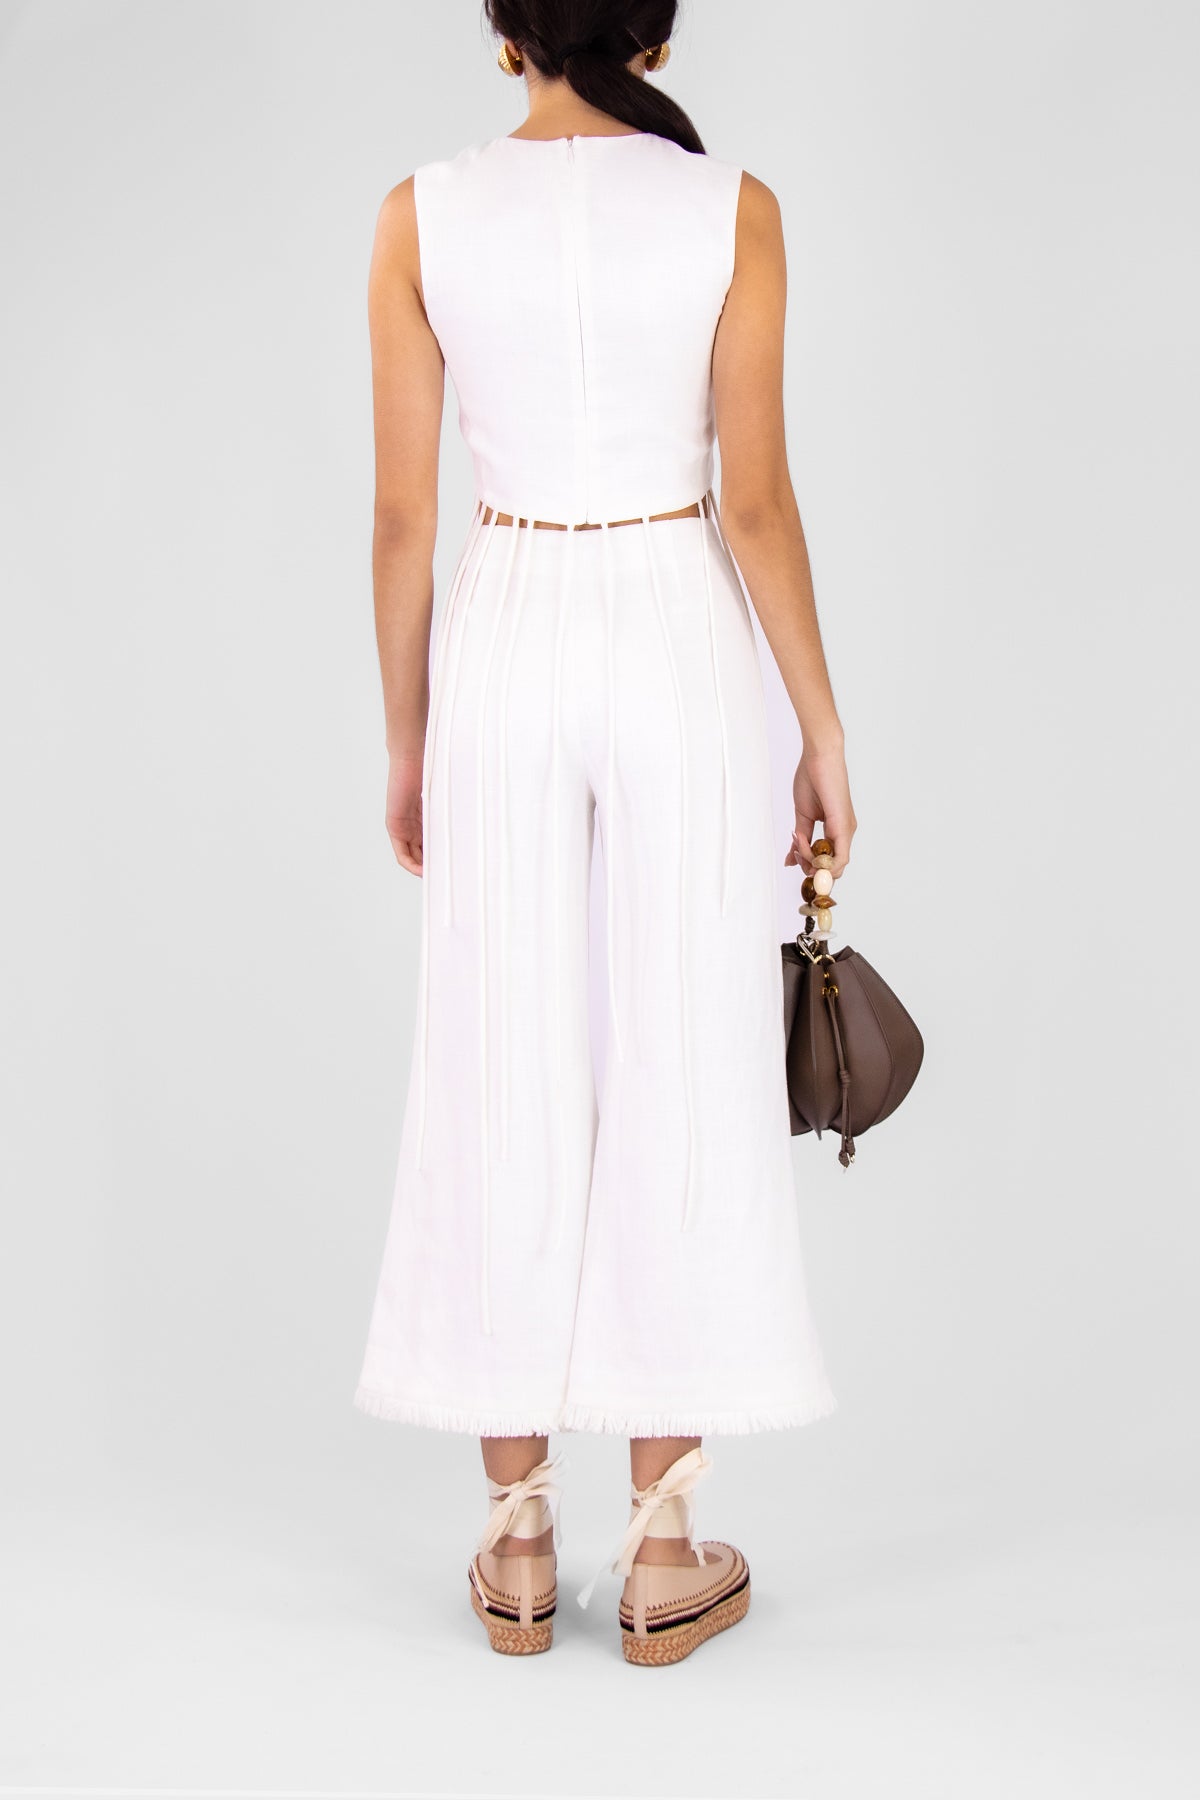 Nyle Pant in White - shop-olivia.com